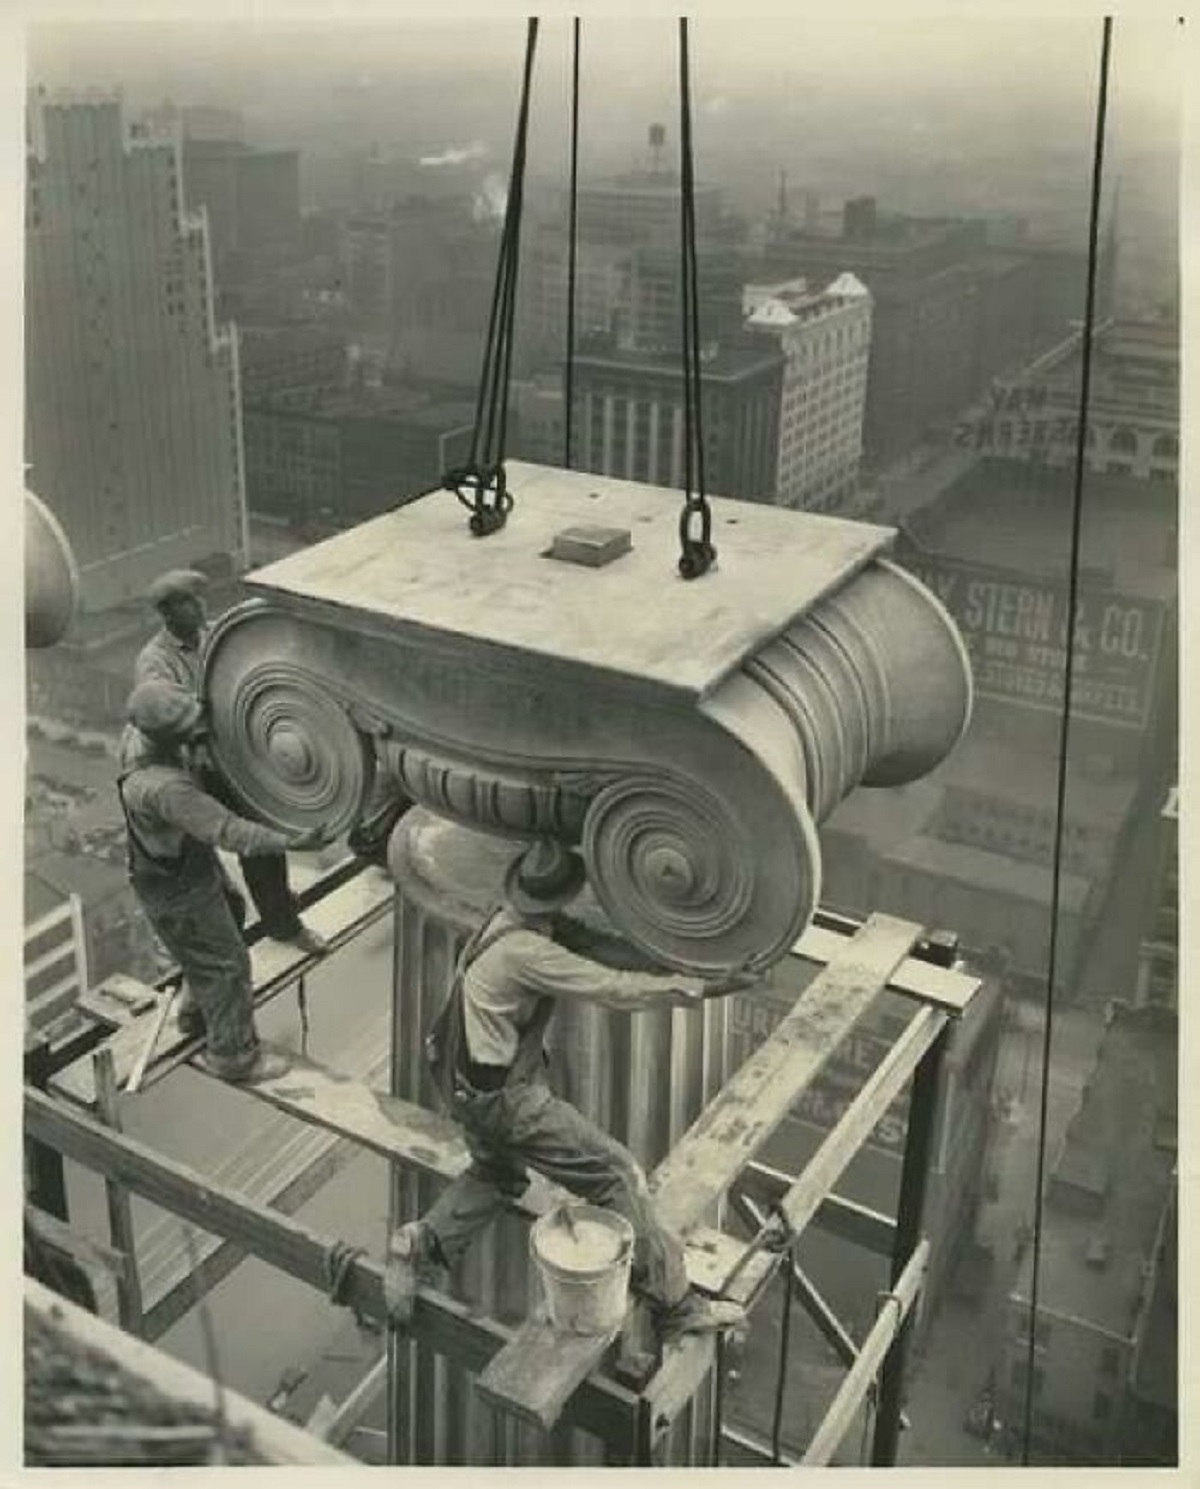 Installing a Greek column at the Civil Courts Building in St. Louis around 1929.